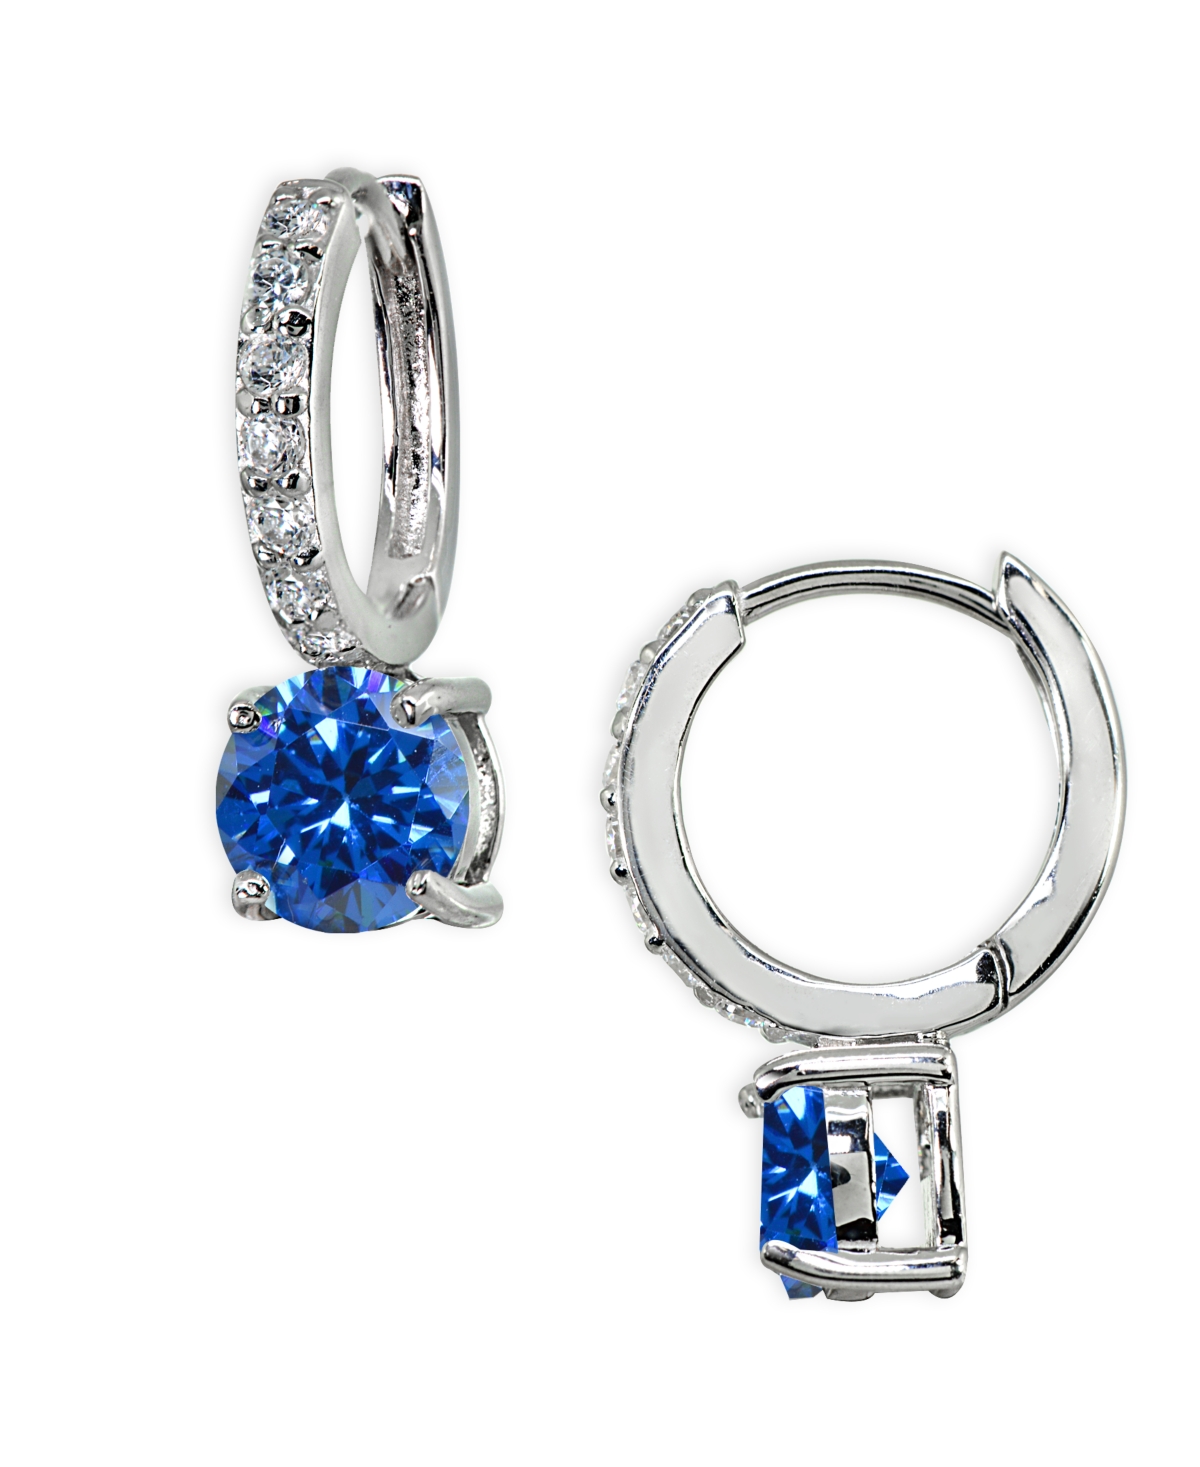 Giani Bernini Colored Cubic Zirconia Huggie Hoop Earrings In Sterling Silver Or 18k Gold Over Silver (also Availab In Blue,silver